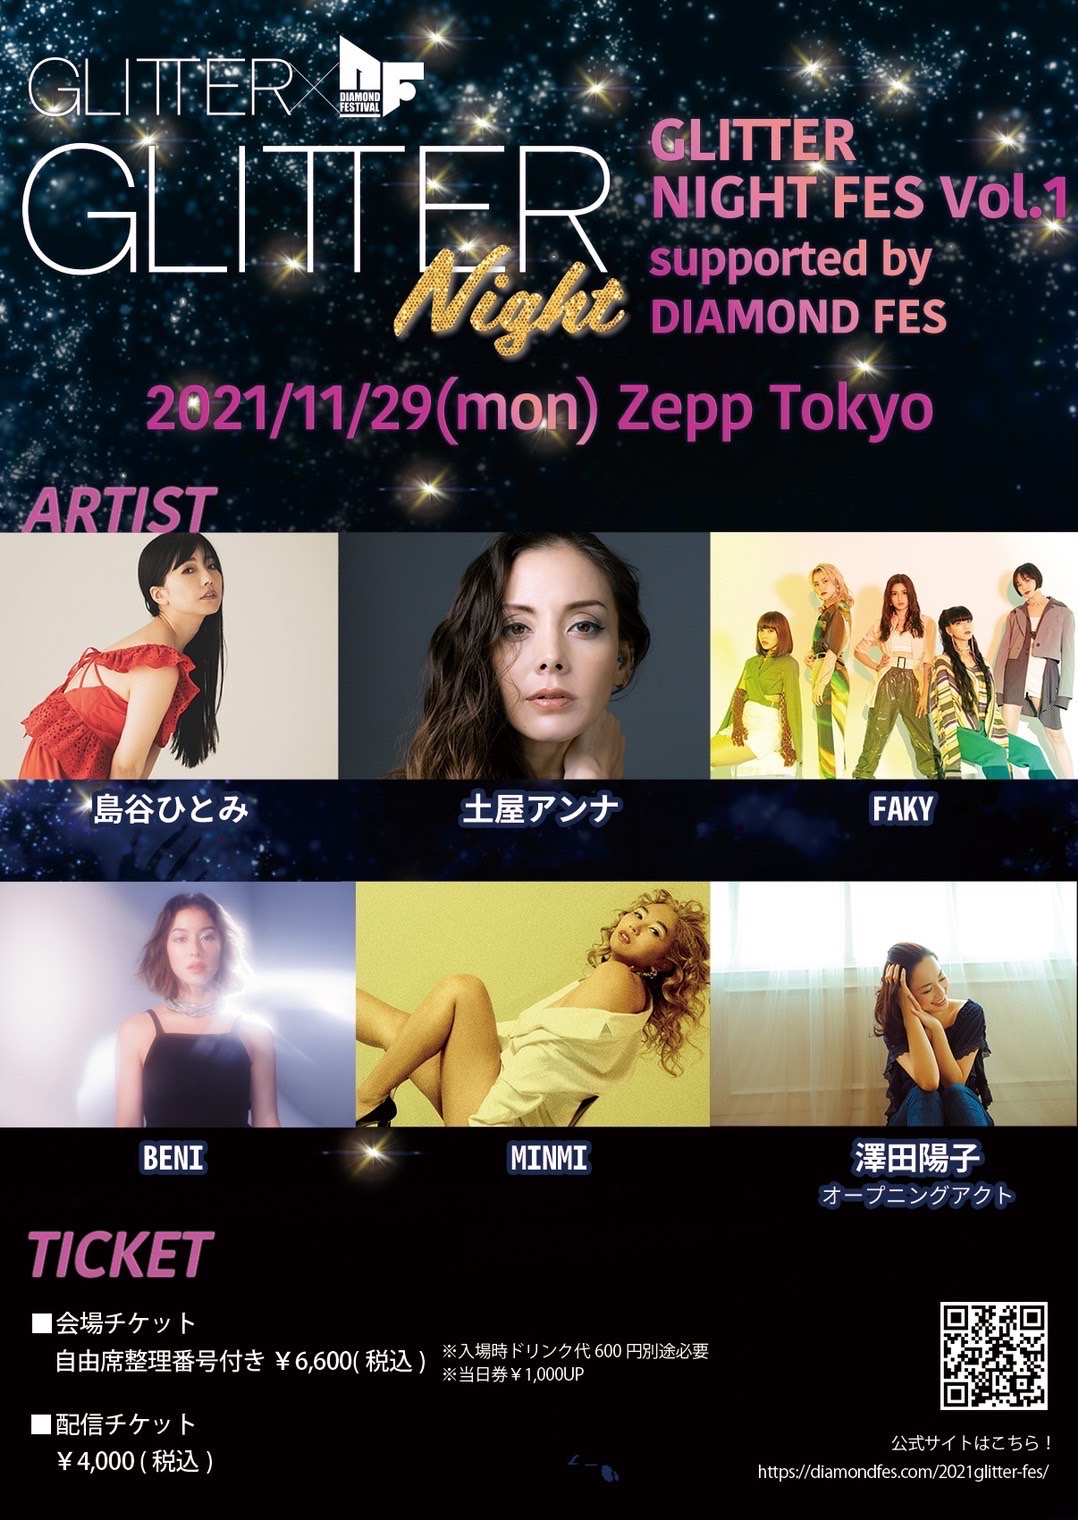 GLITTER NIGHT FES Vol.1 supported by DIAMOND FES